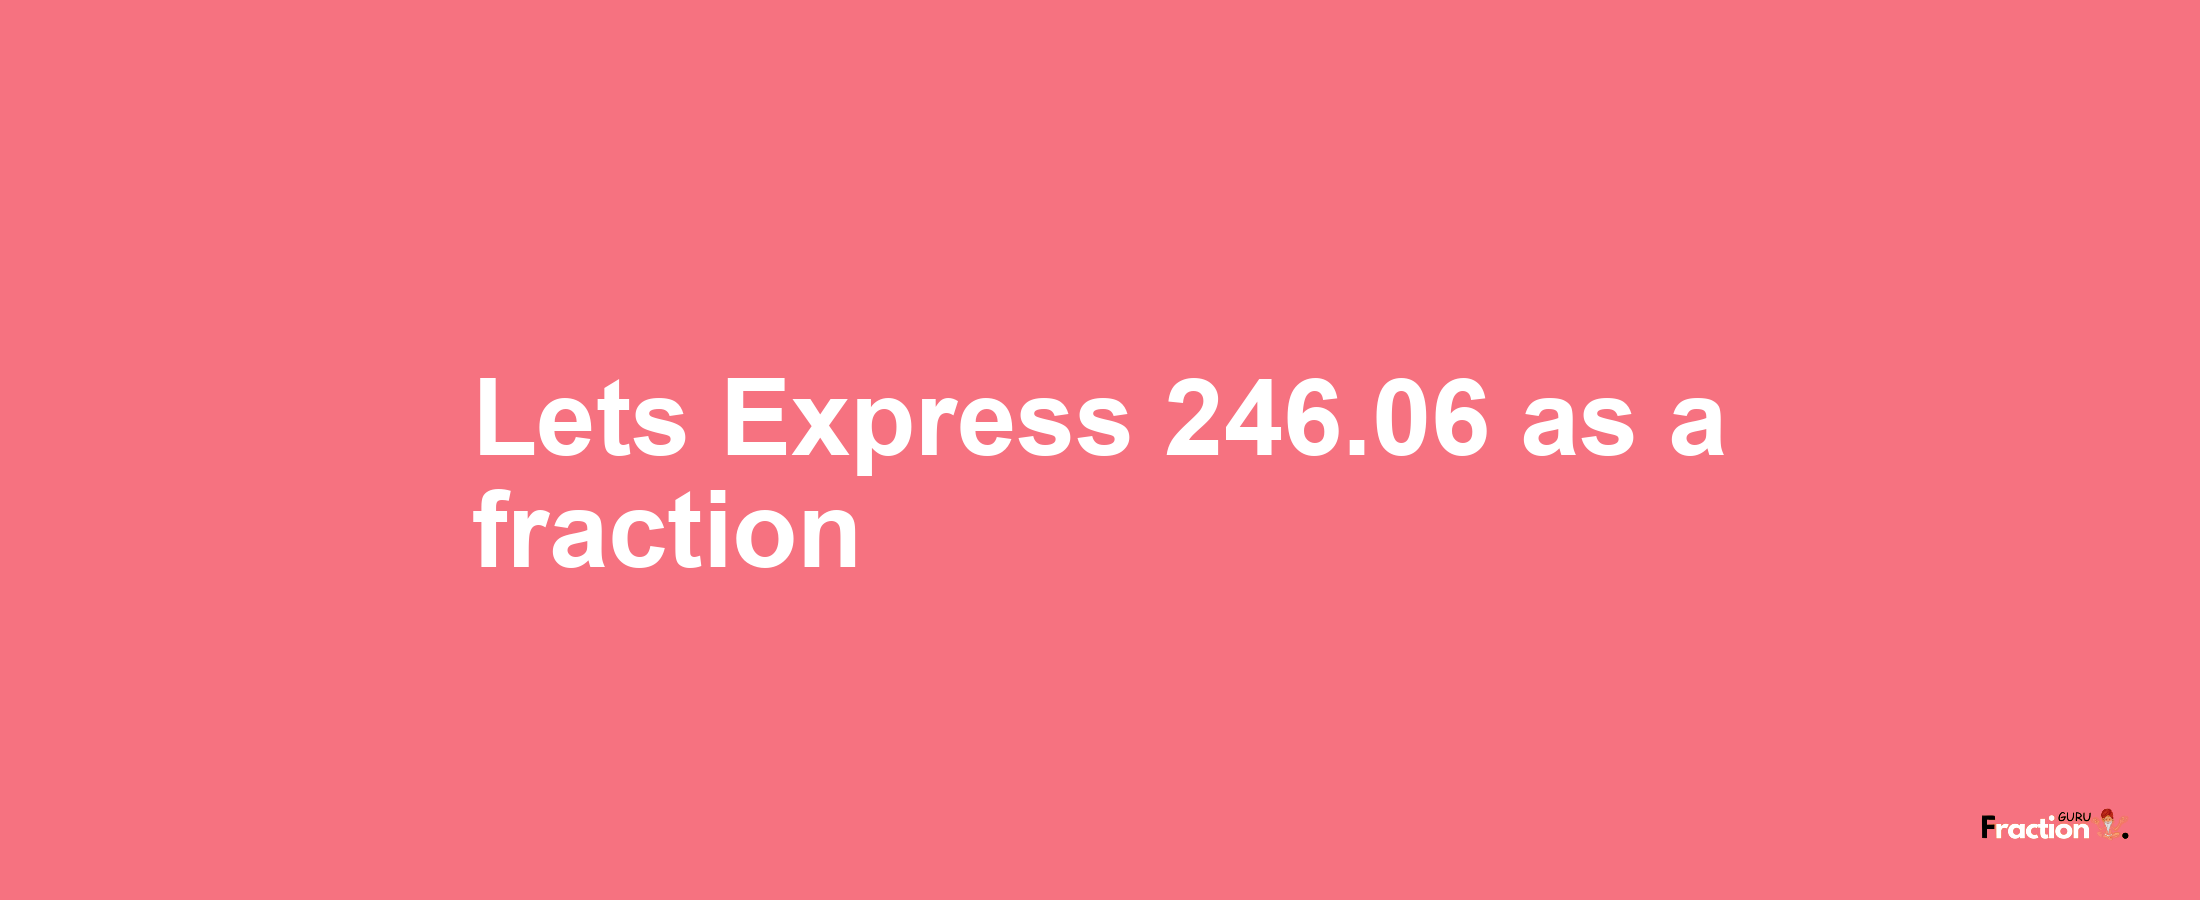 Lets Express 246.06 as afraction